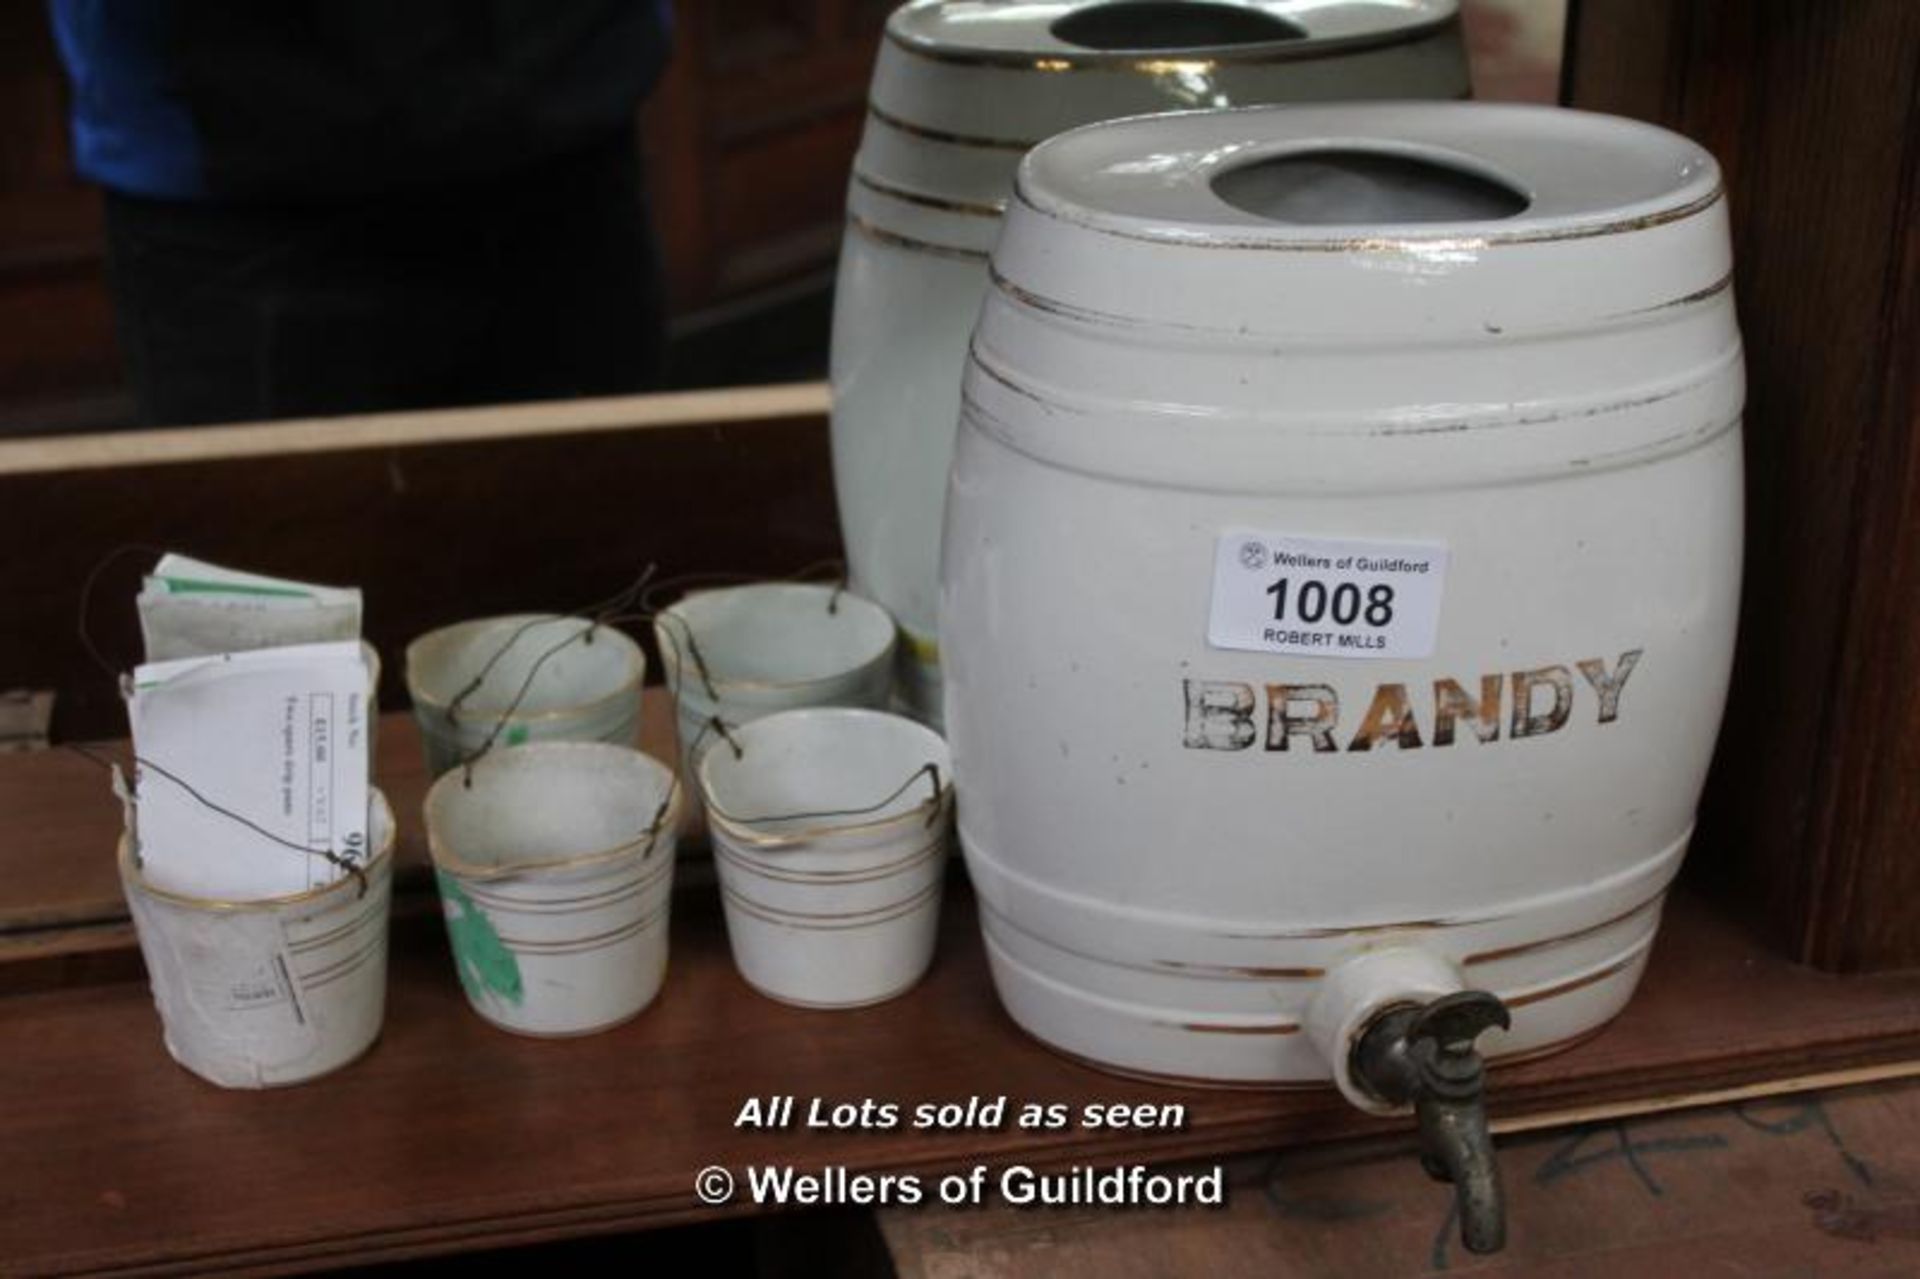 *VICTORIAN WHITE CERAMIC 'BRANDY' BARREL WITH DRIP PAN (NO LID), EARLY 1900S. 275MM (10.8IN) HIGH - Image 2 of 2